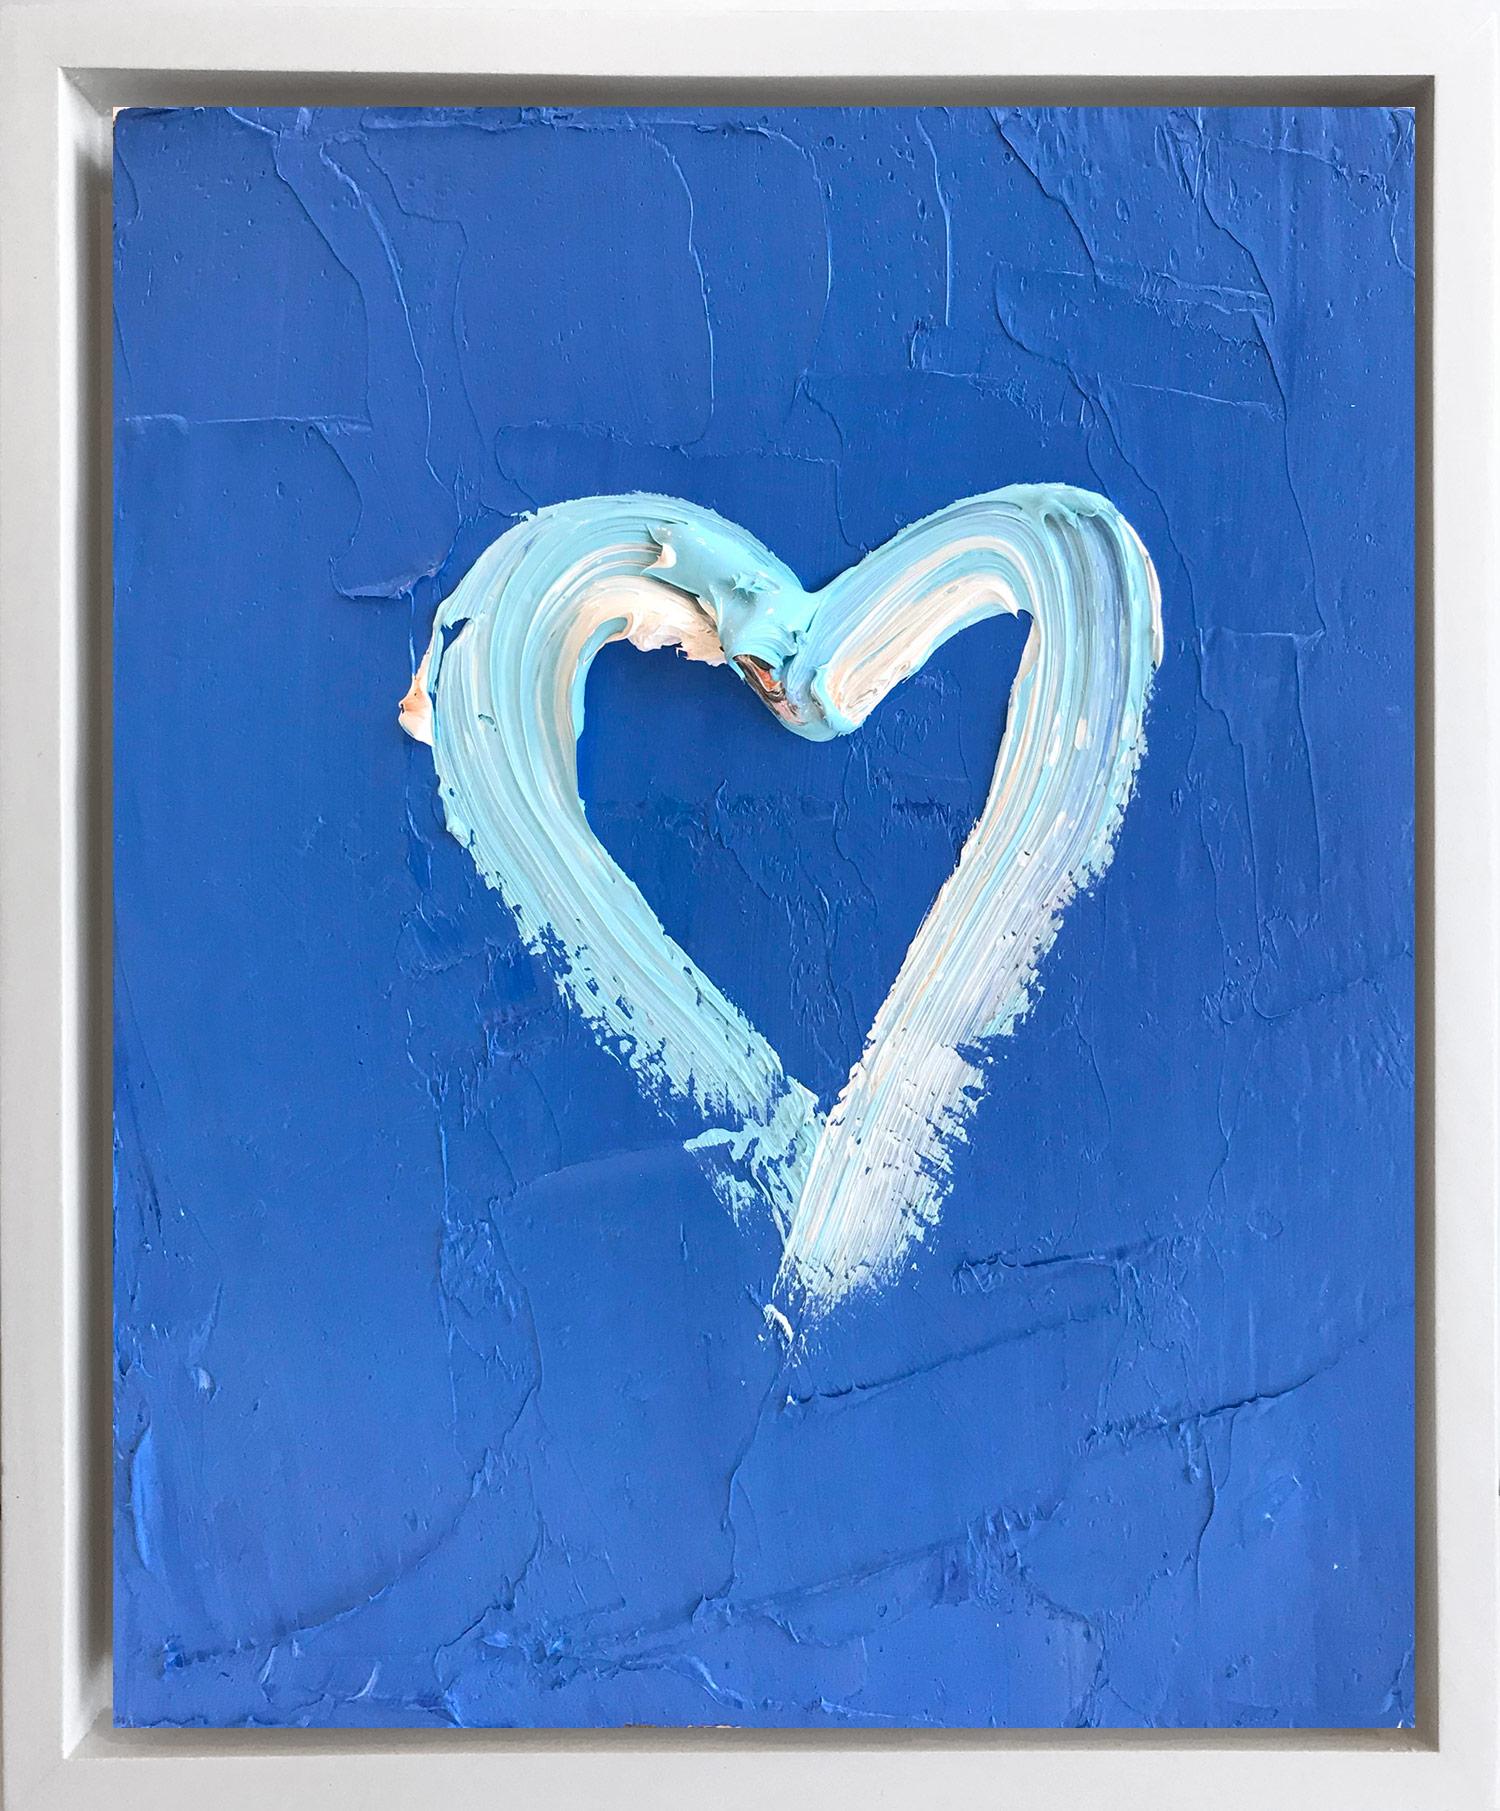 Cindy Shaoul Figurative Painting - "My Heart on Blue Blue" Contemporary Oil Painting Framed with Floater Frame